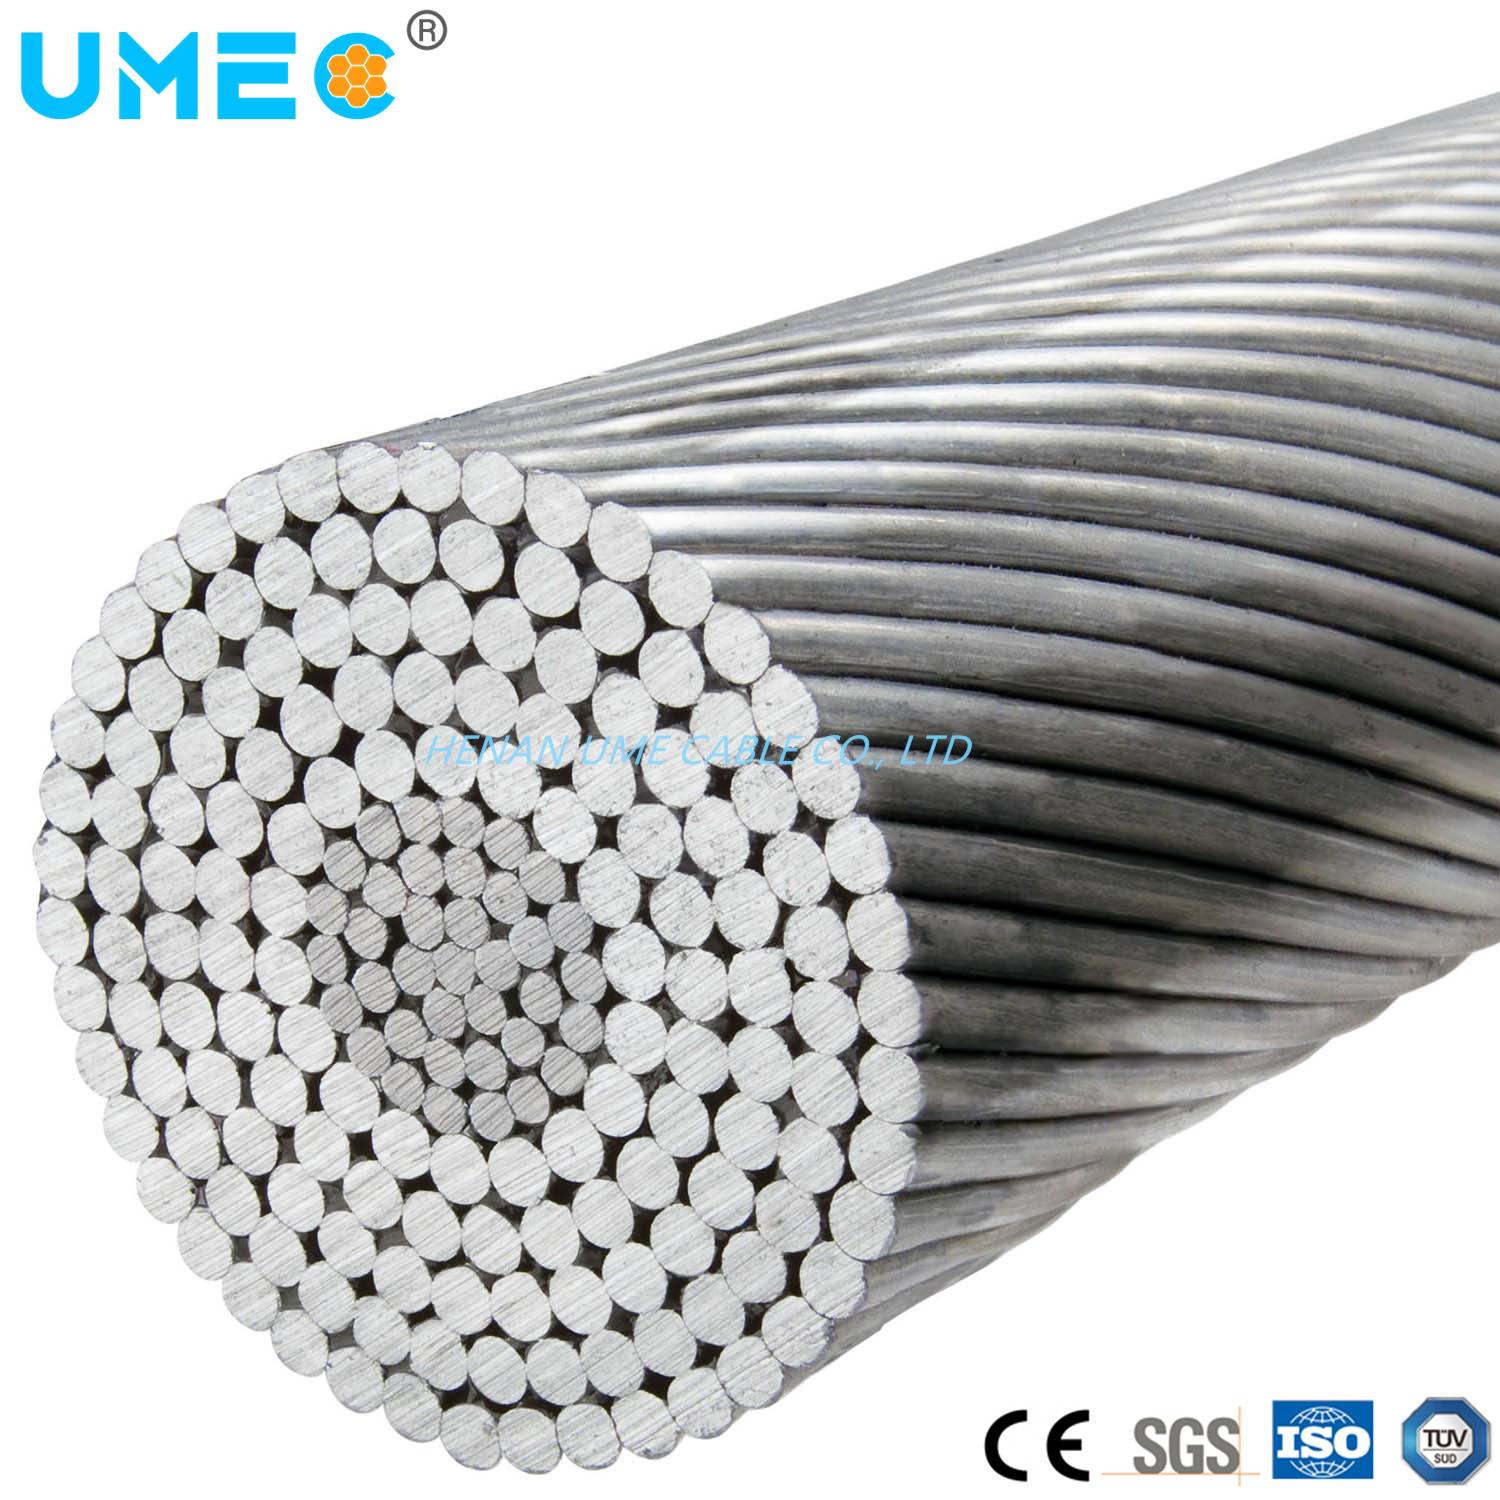 Bare Conductor Transmission Line All Aluminium Conductor Steel Reinforced ACSR/Aw